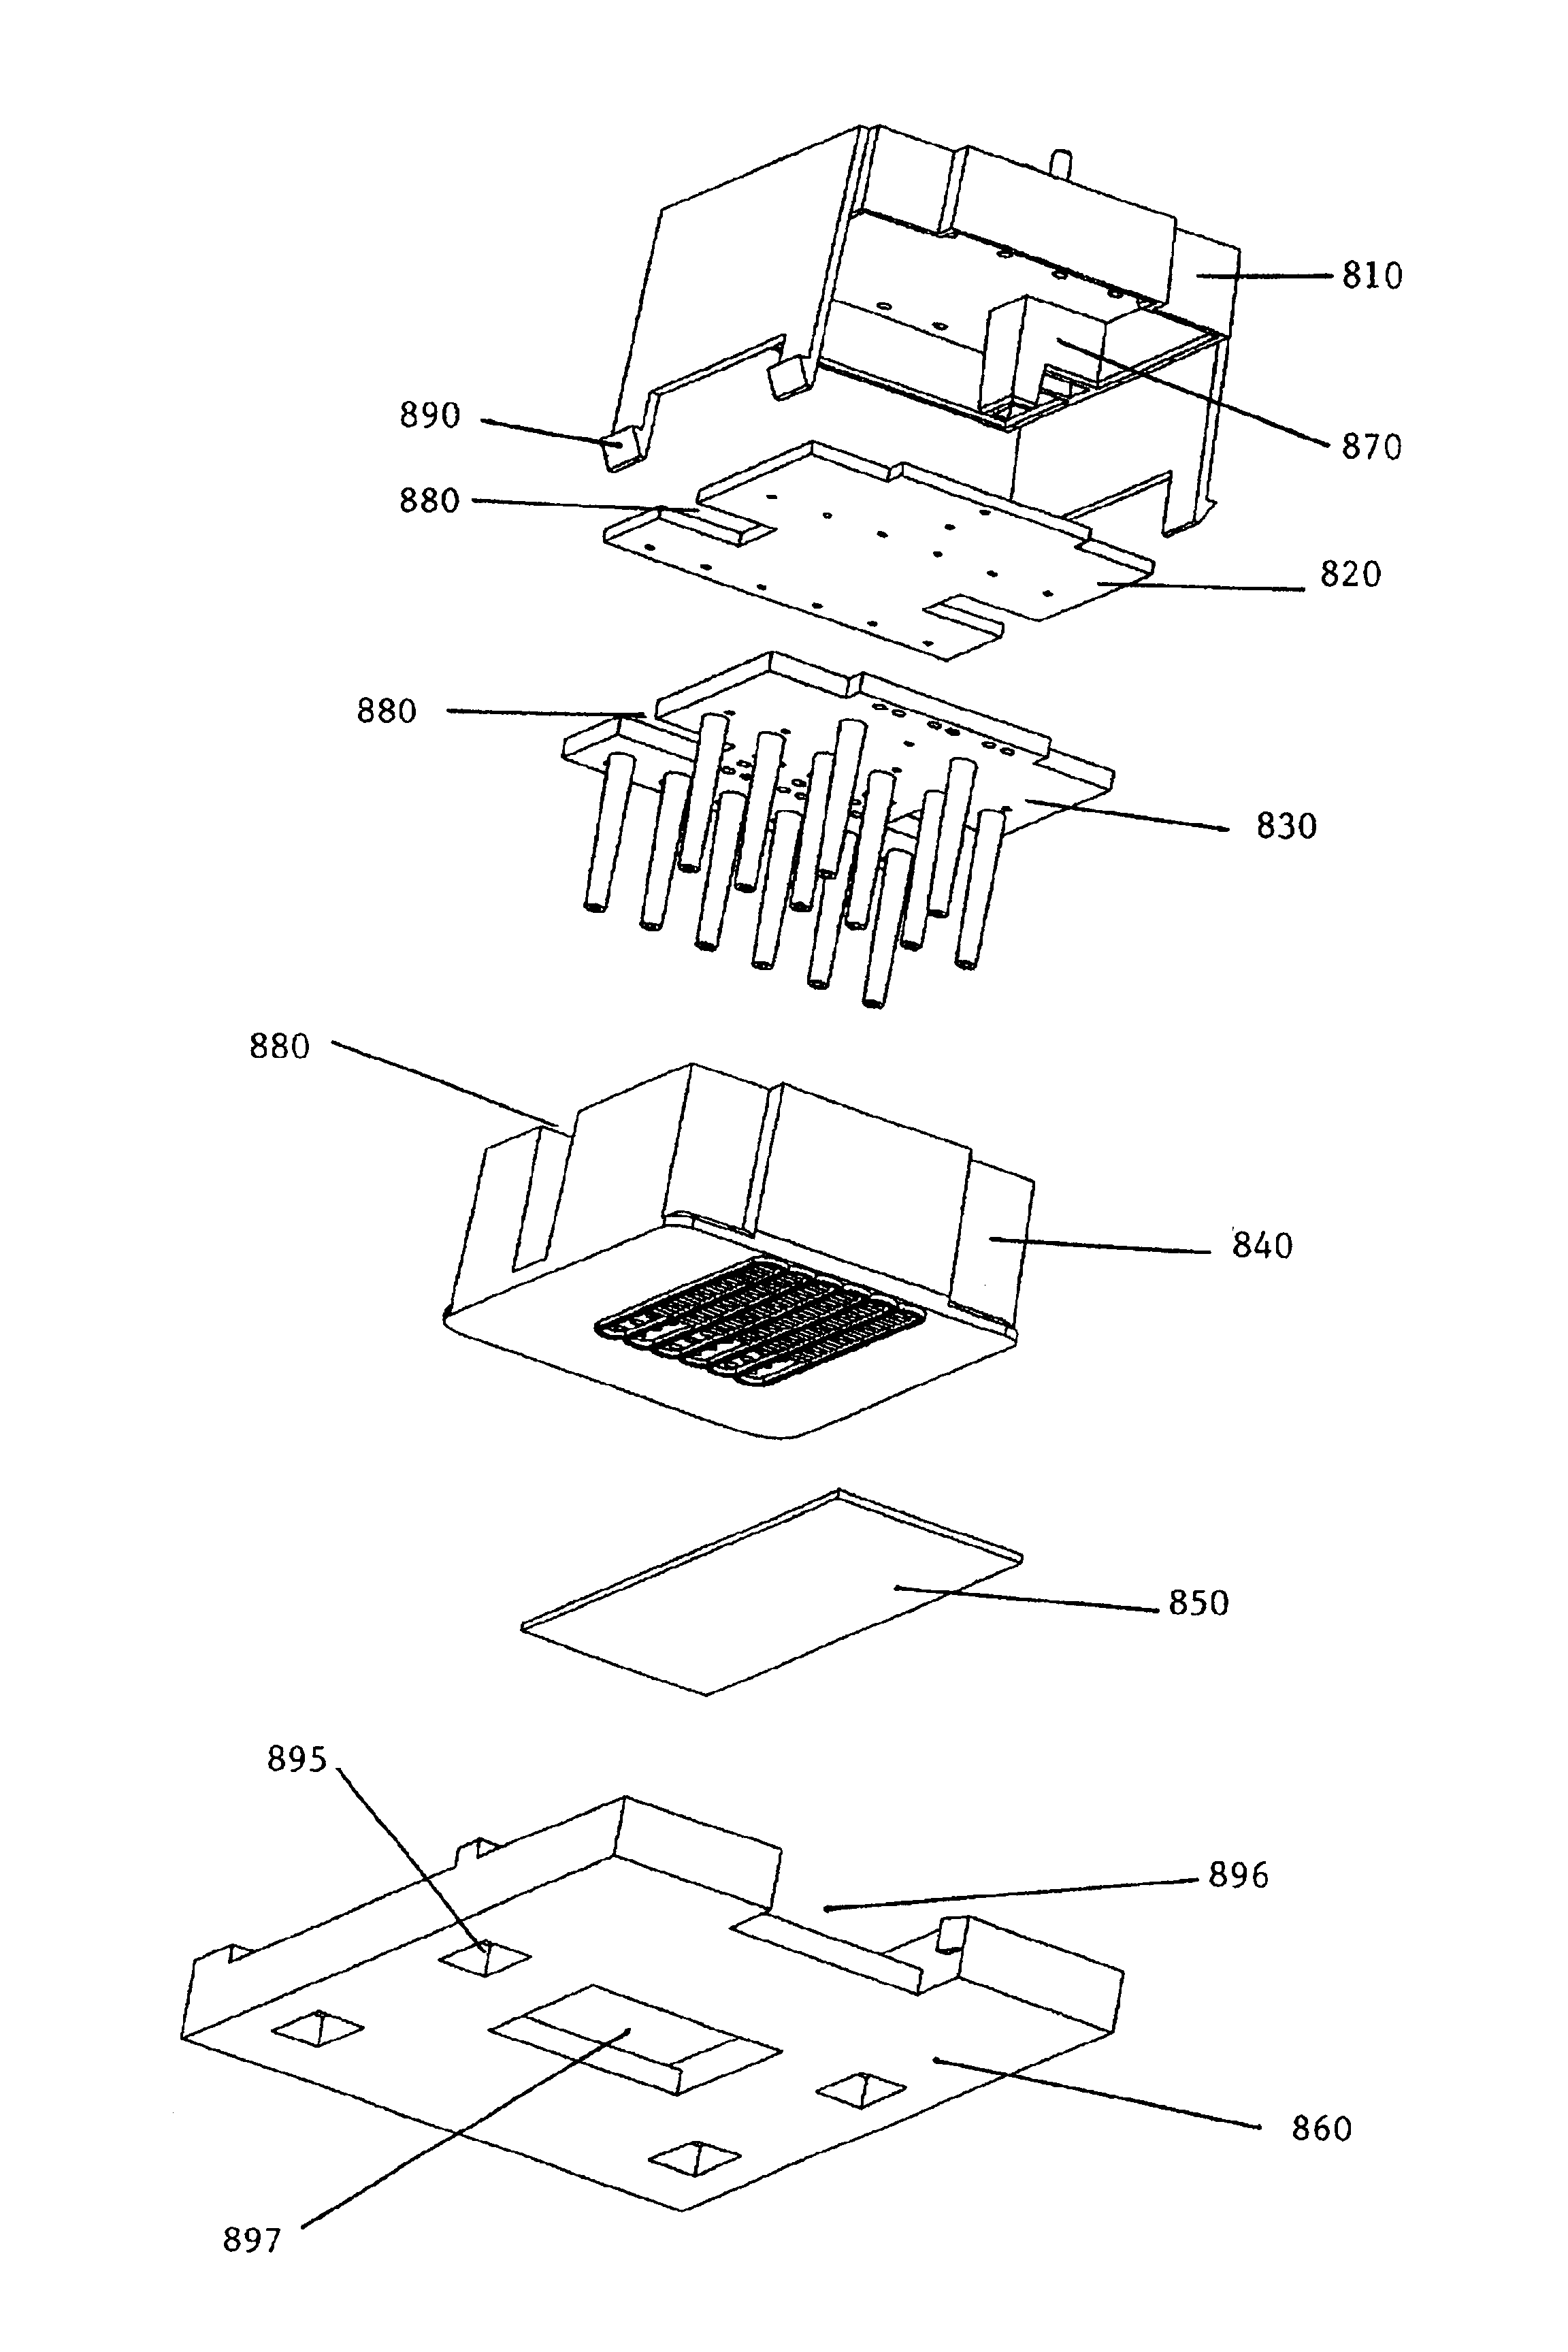 Portable biosensor apparatus with controlled flow